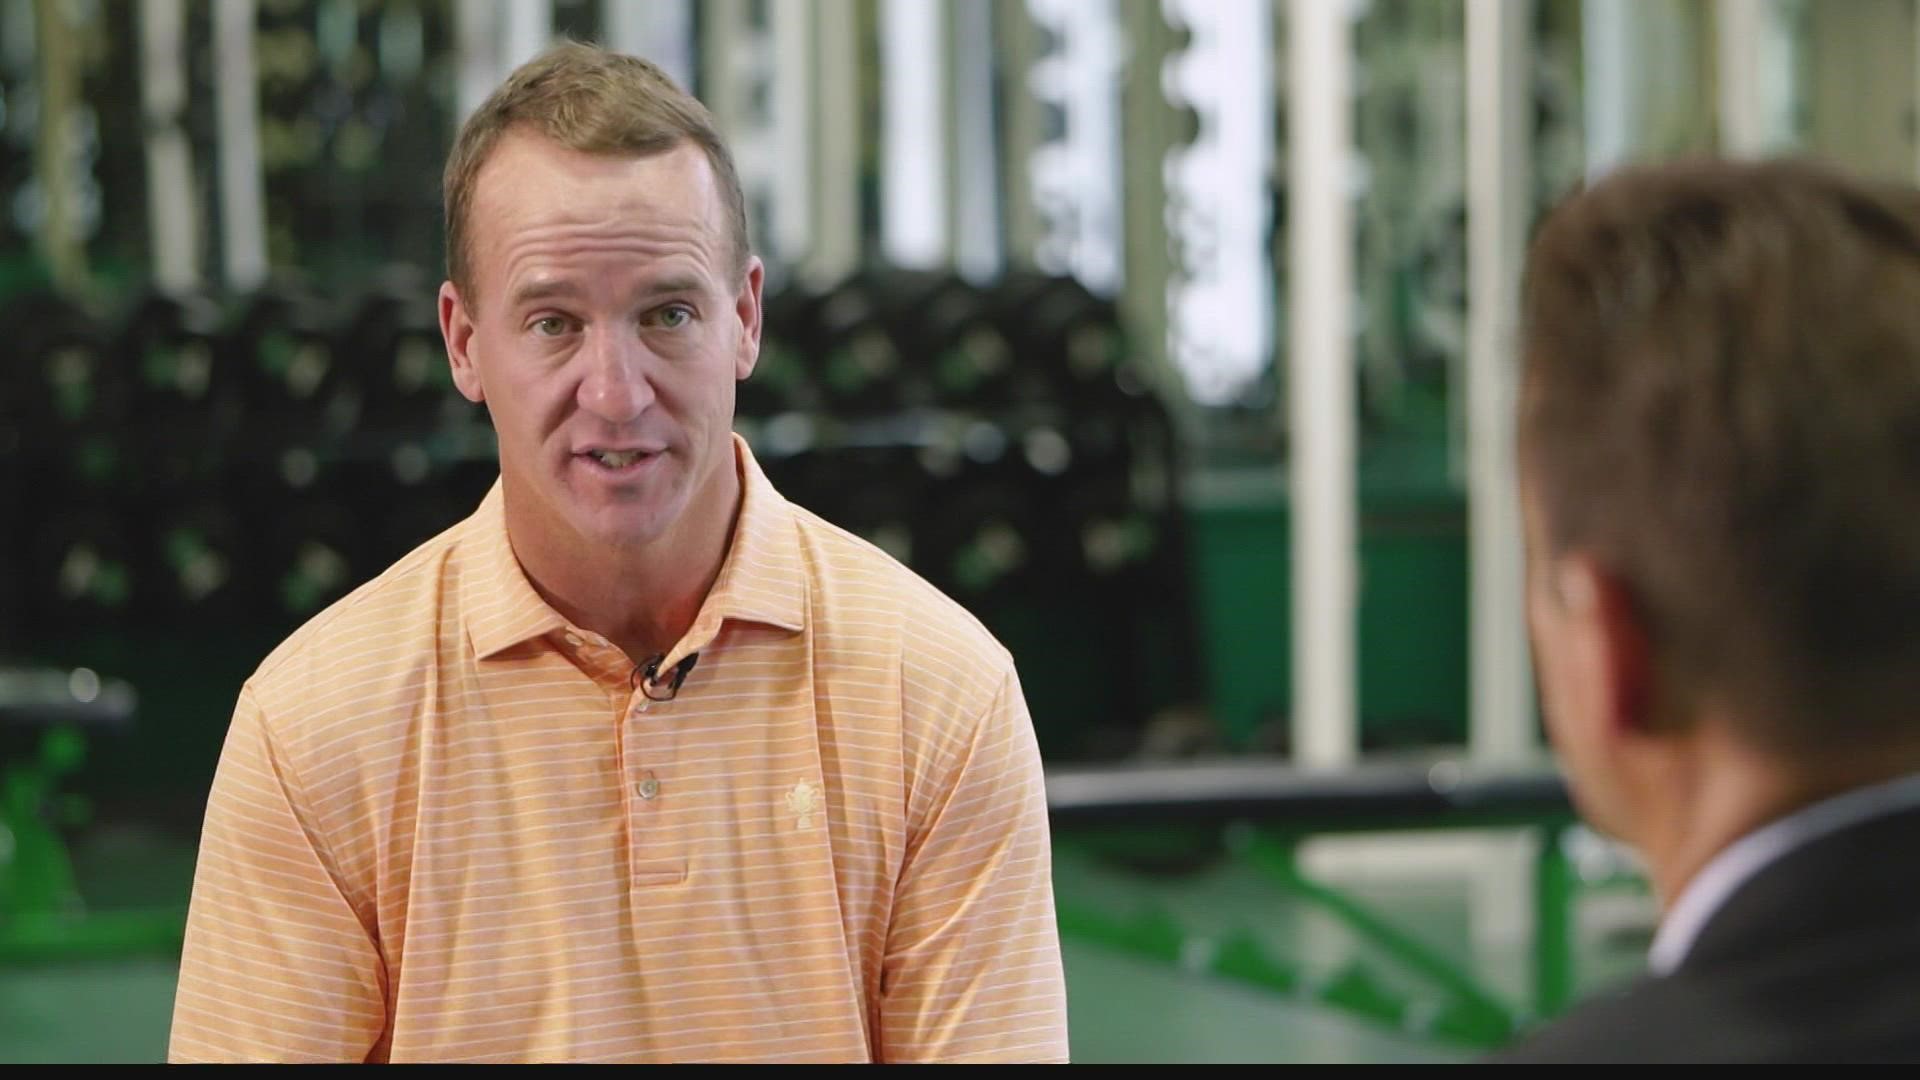 Peyton told 13News Sports Director Dave Calabro that he looks forward to being reunited with some of his old teammates in Canton.